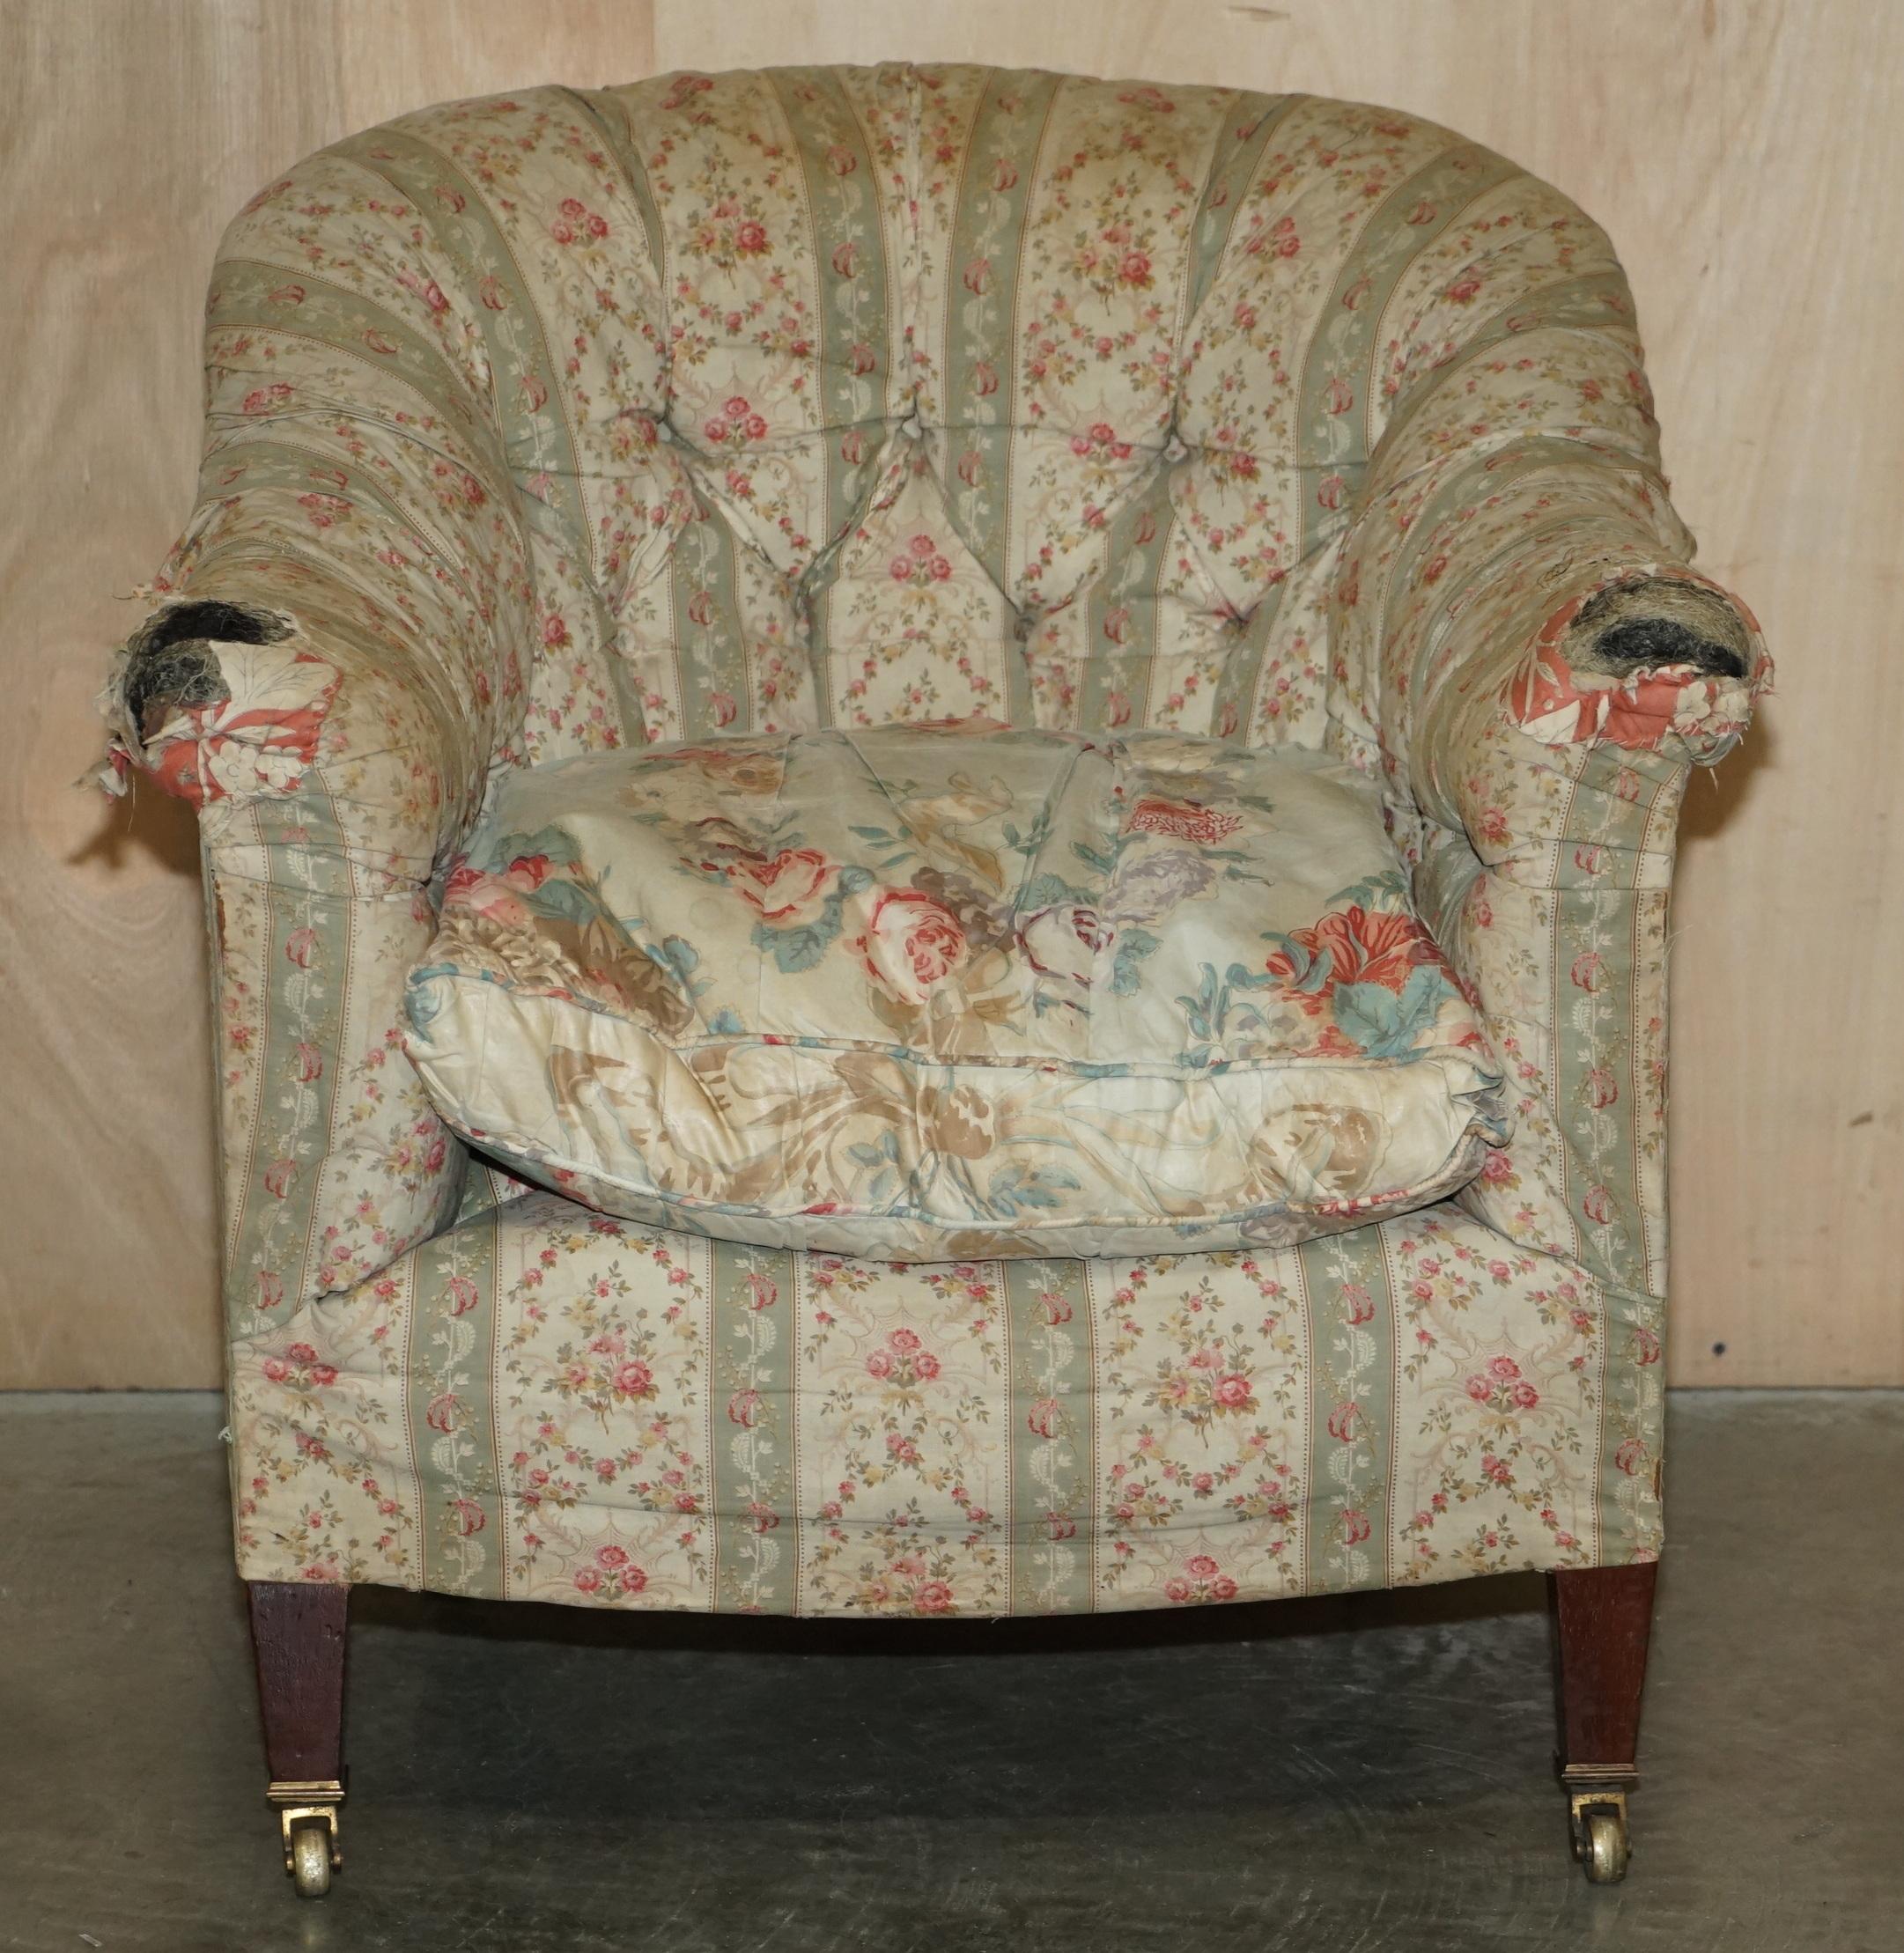 Pair of Antique Original Ticking Fabric Howard & Son's Chesterfield Armchairs For Sale 7